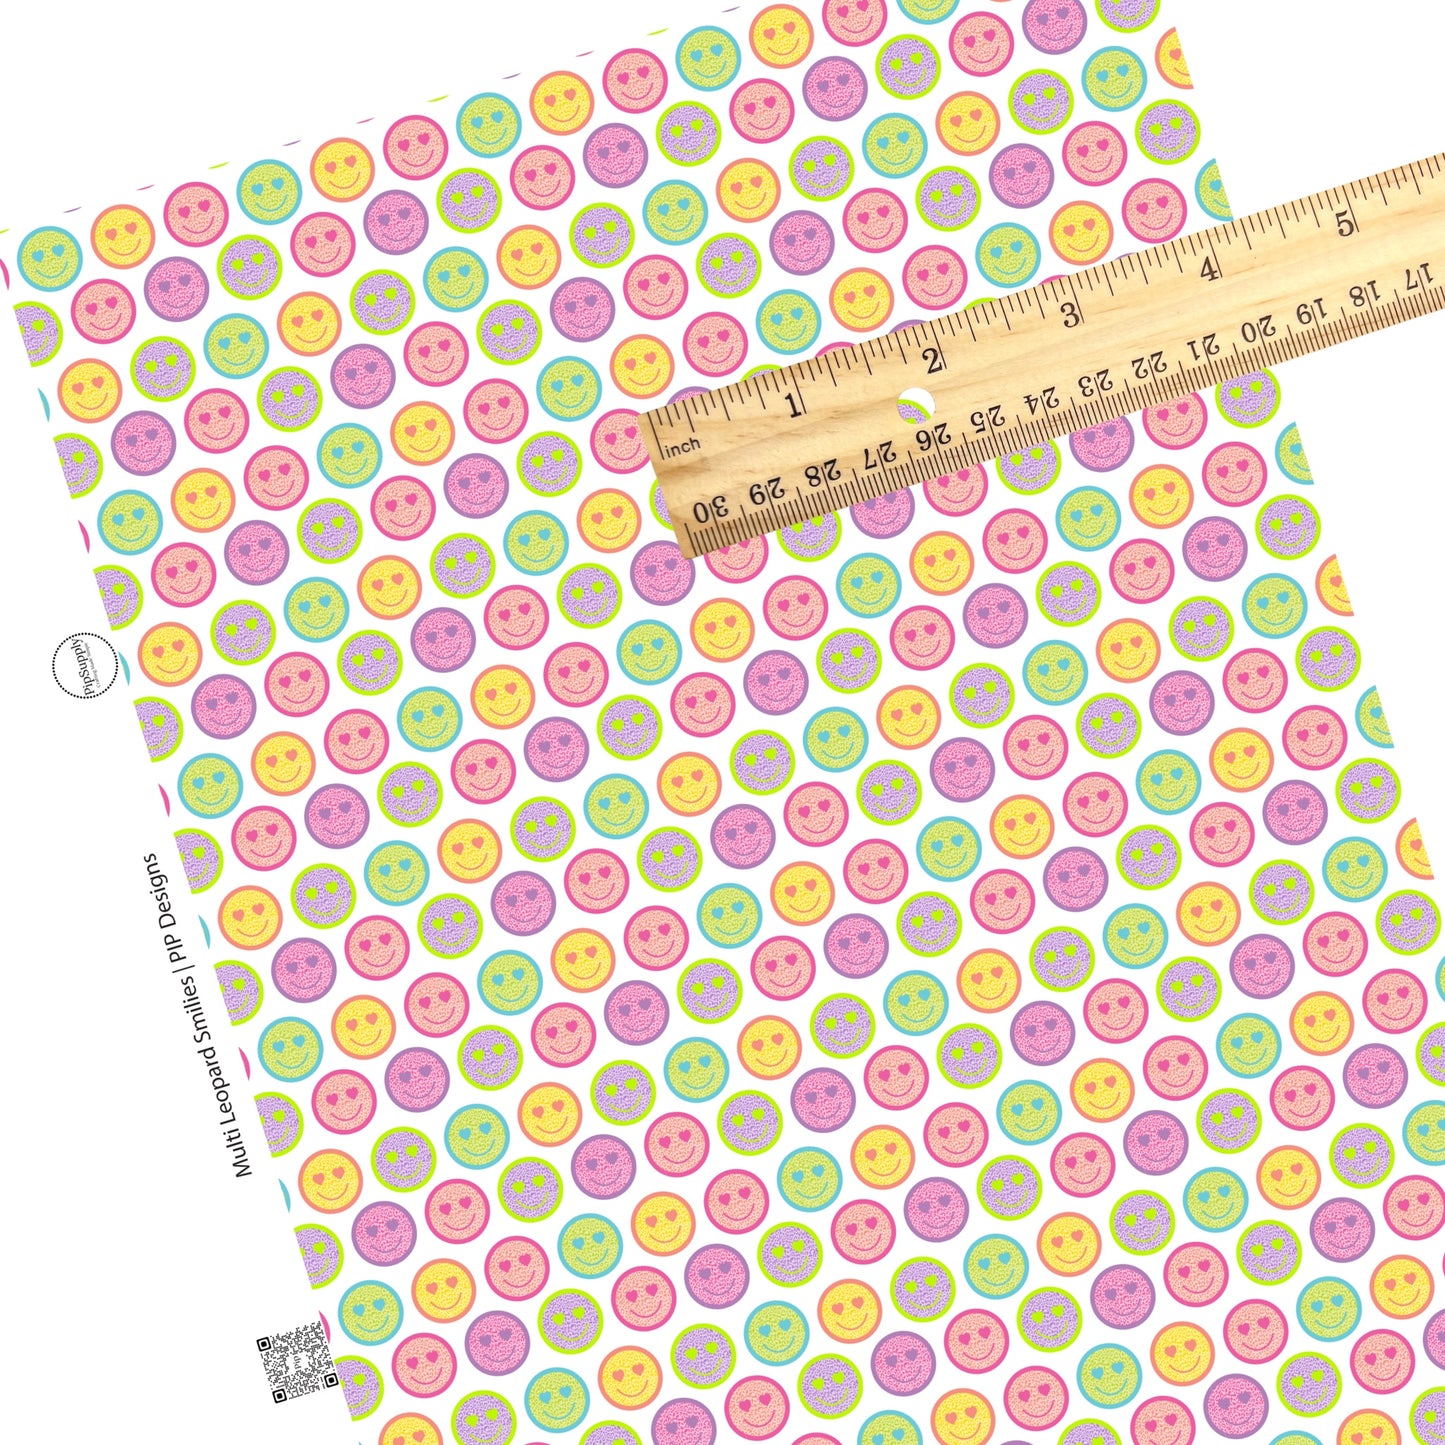 Lime, purple, pink, peach, yellow, and aqua leopard spots on matching smiley faces on white faux leather sheets